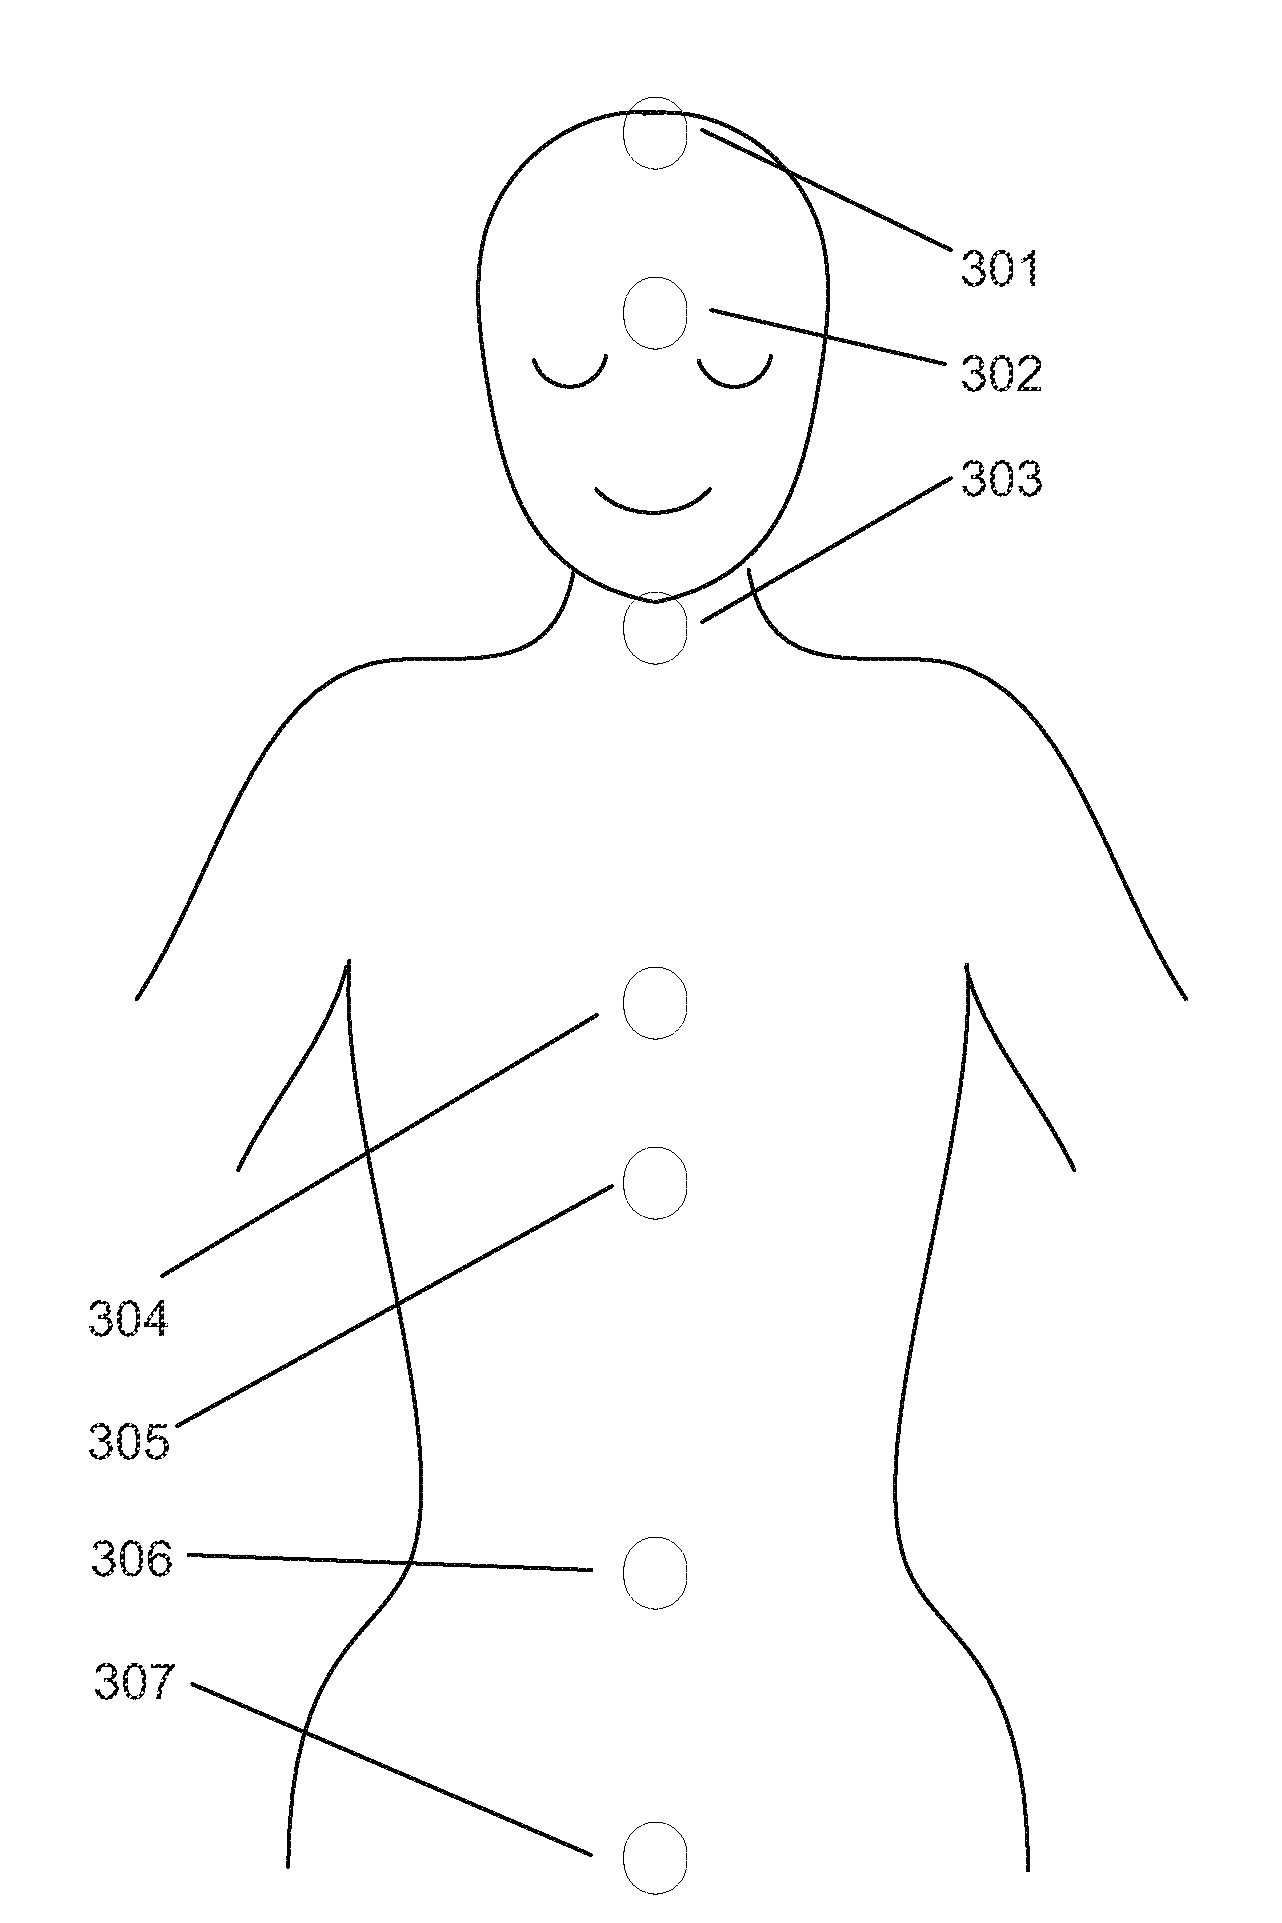 Method and apparatus for treatment of neurodegenerative diseases including depression, mild cognitive impairment, and dementia